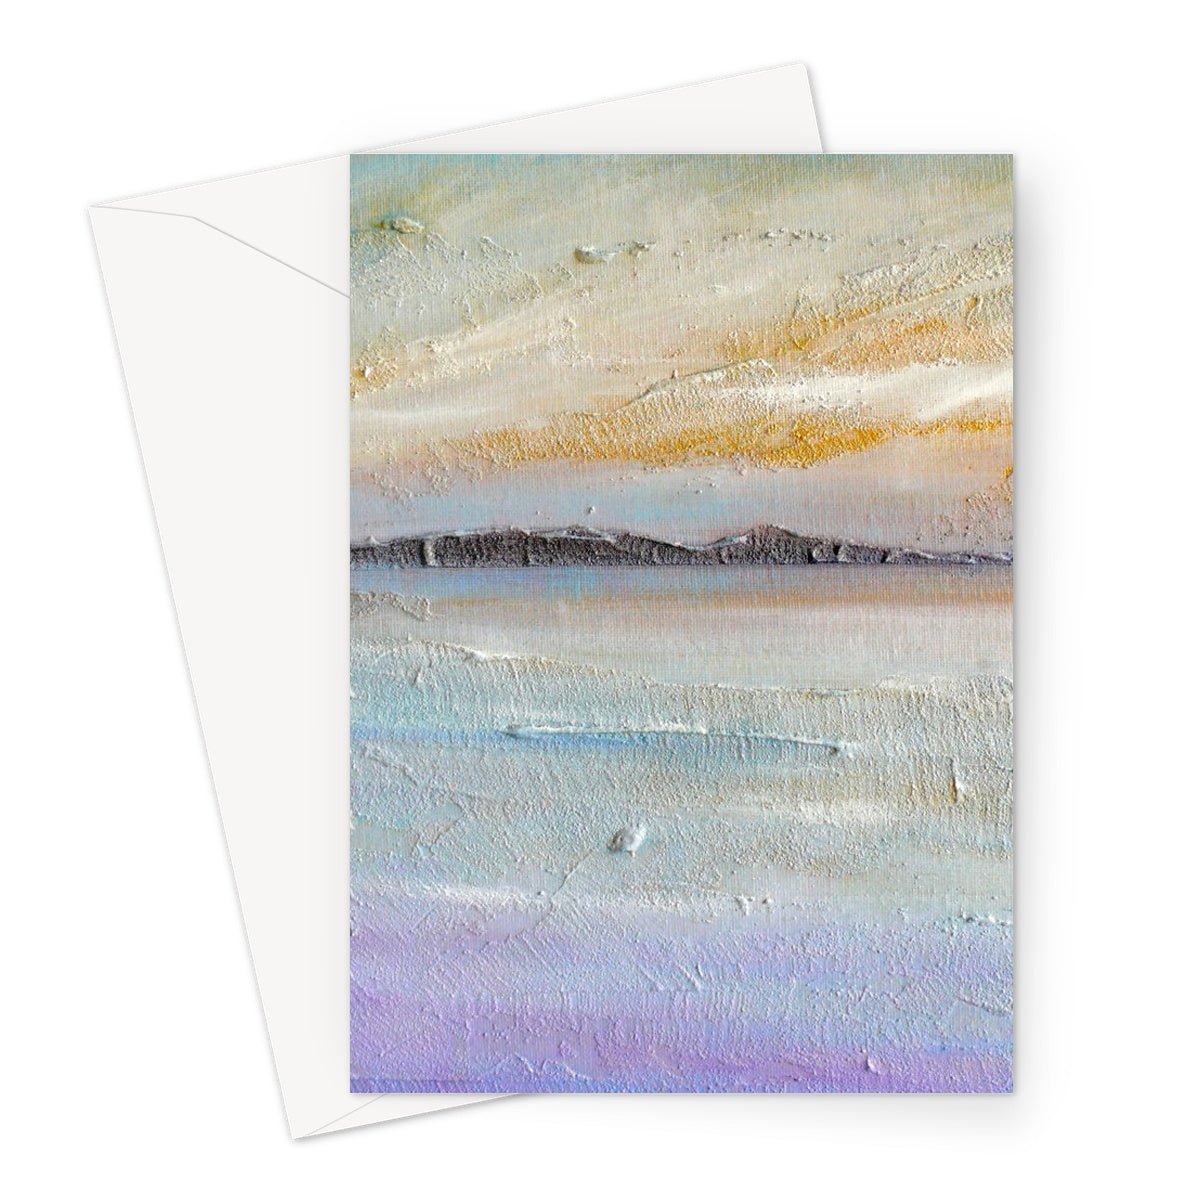 Sollas Beach South Uist Art Gifts Greeting Card-Greetings Cards-Hebridean Islands Art Gallery-A5 Portrait-1 Card-Paintings, Prints, Homeware, Art Gifts From Scotland By Scottish Artist Kevin Hunter